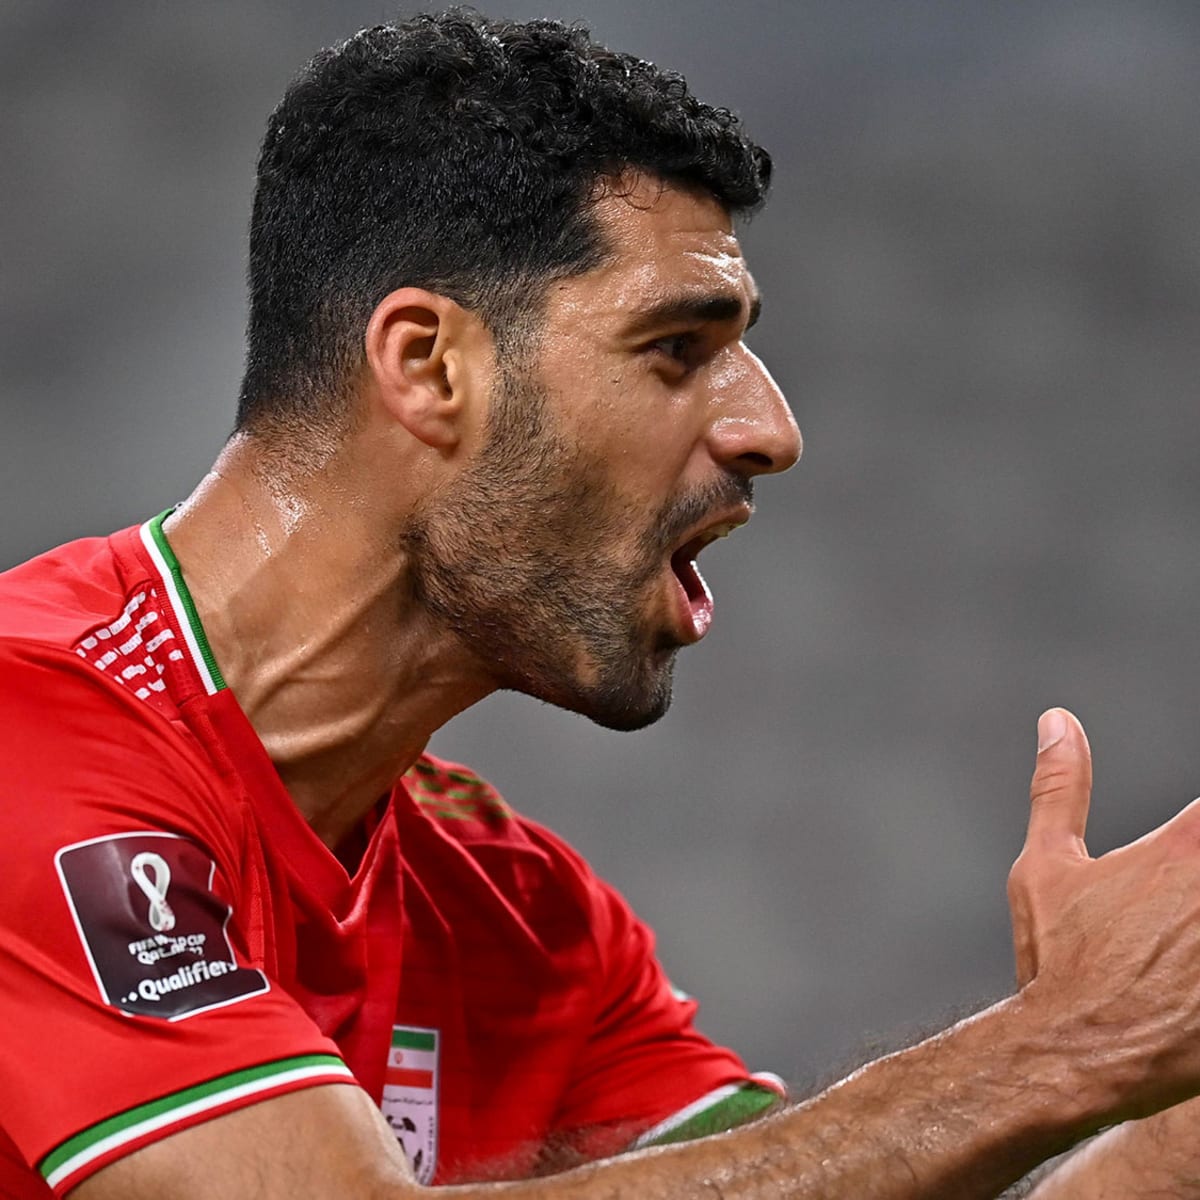 Iran 2022 World Cup squad Roster, outlook, players to watch